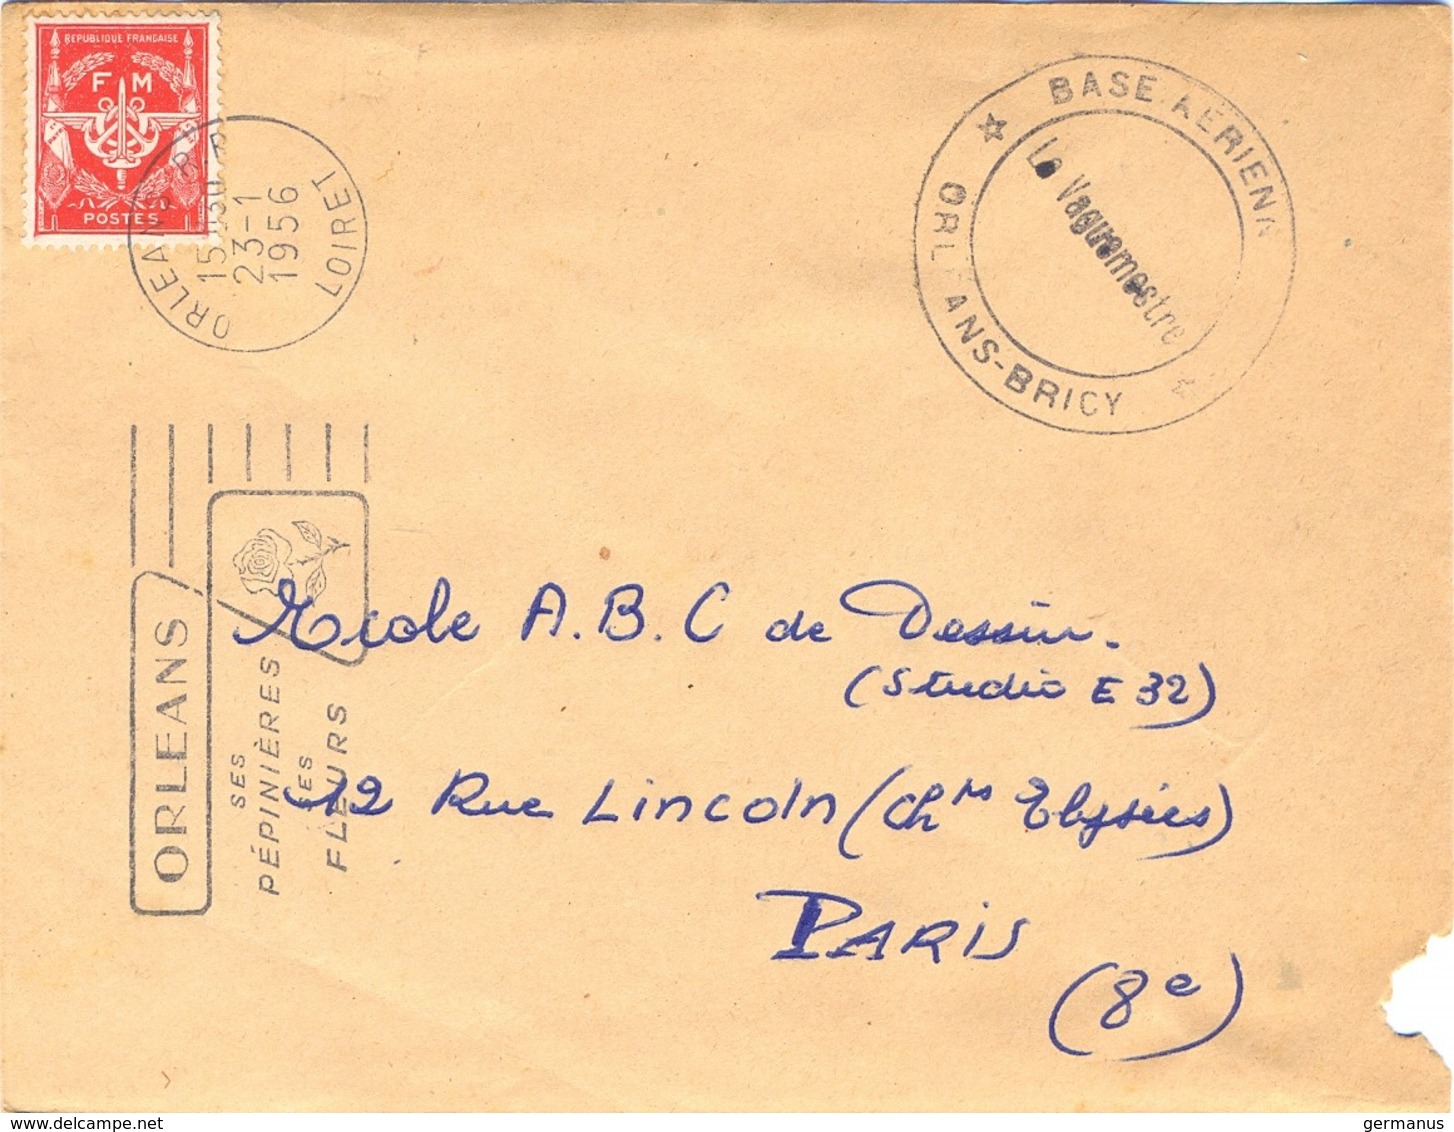 BASE AERIENNE ORLEANS-BRICY  OMec SECAP ORLEANS R.P. LOIRET Du 23-1-1956 - Military Postmarks From 1900 (out Of Wars Periods)